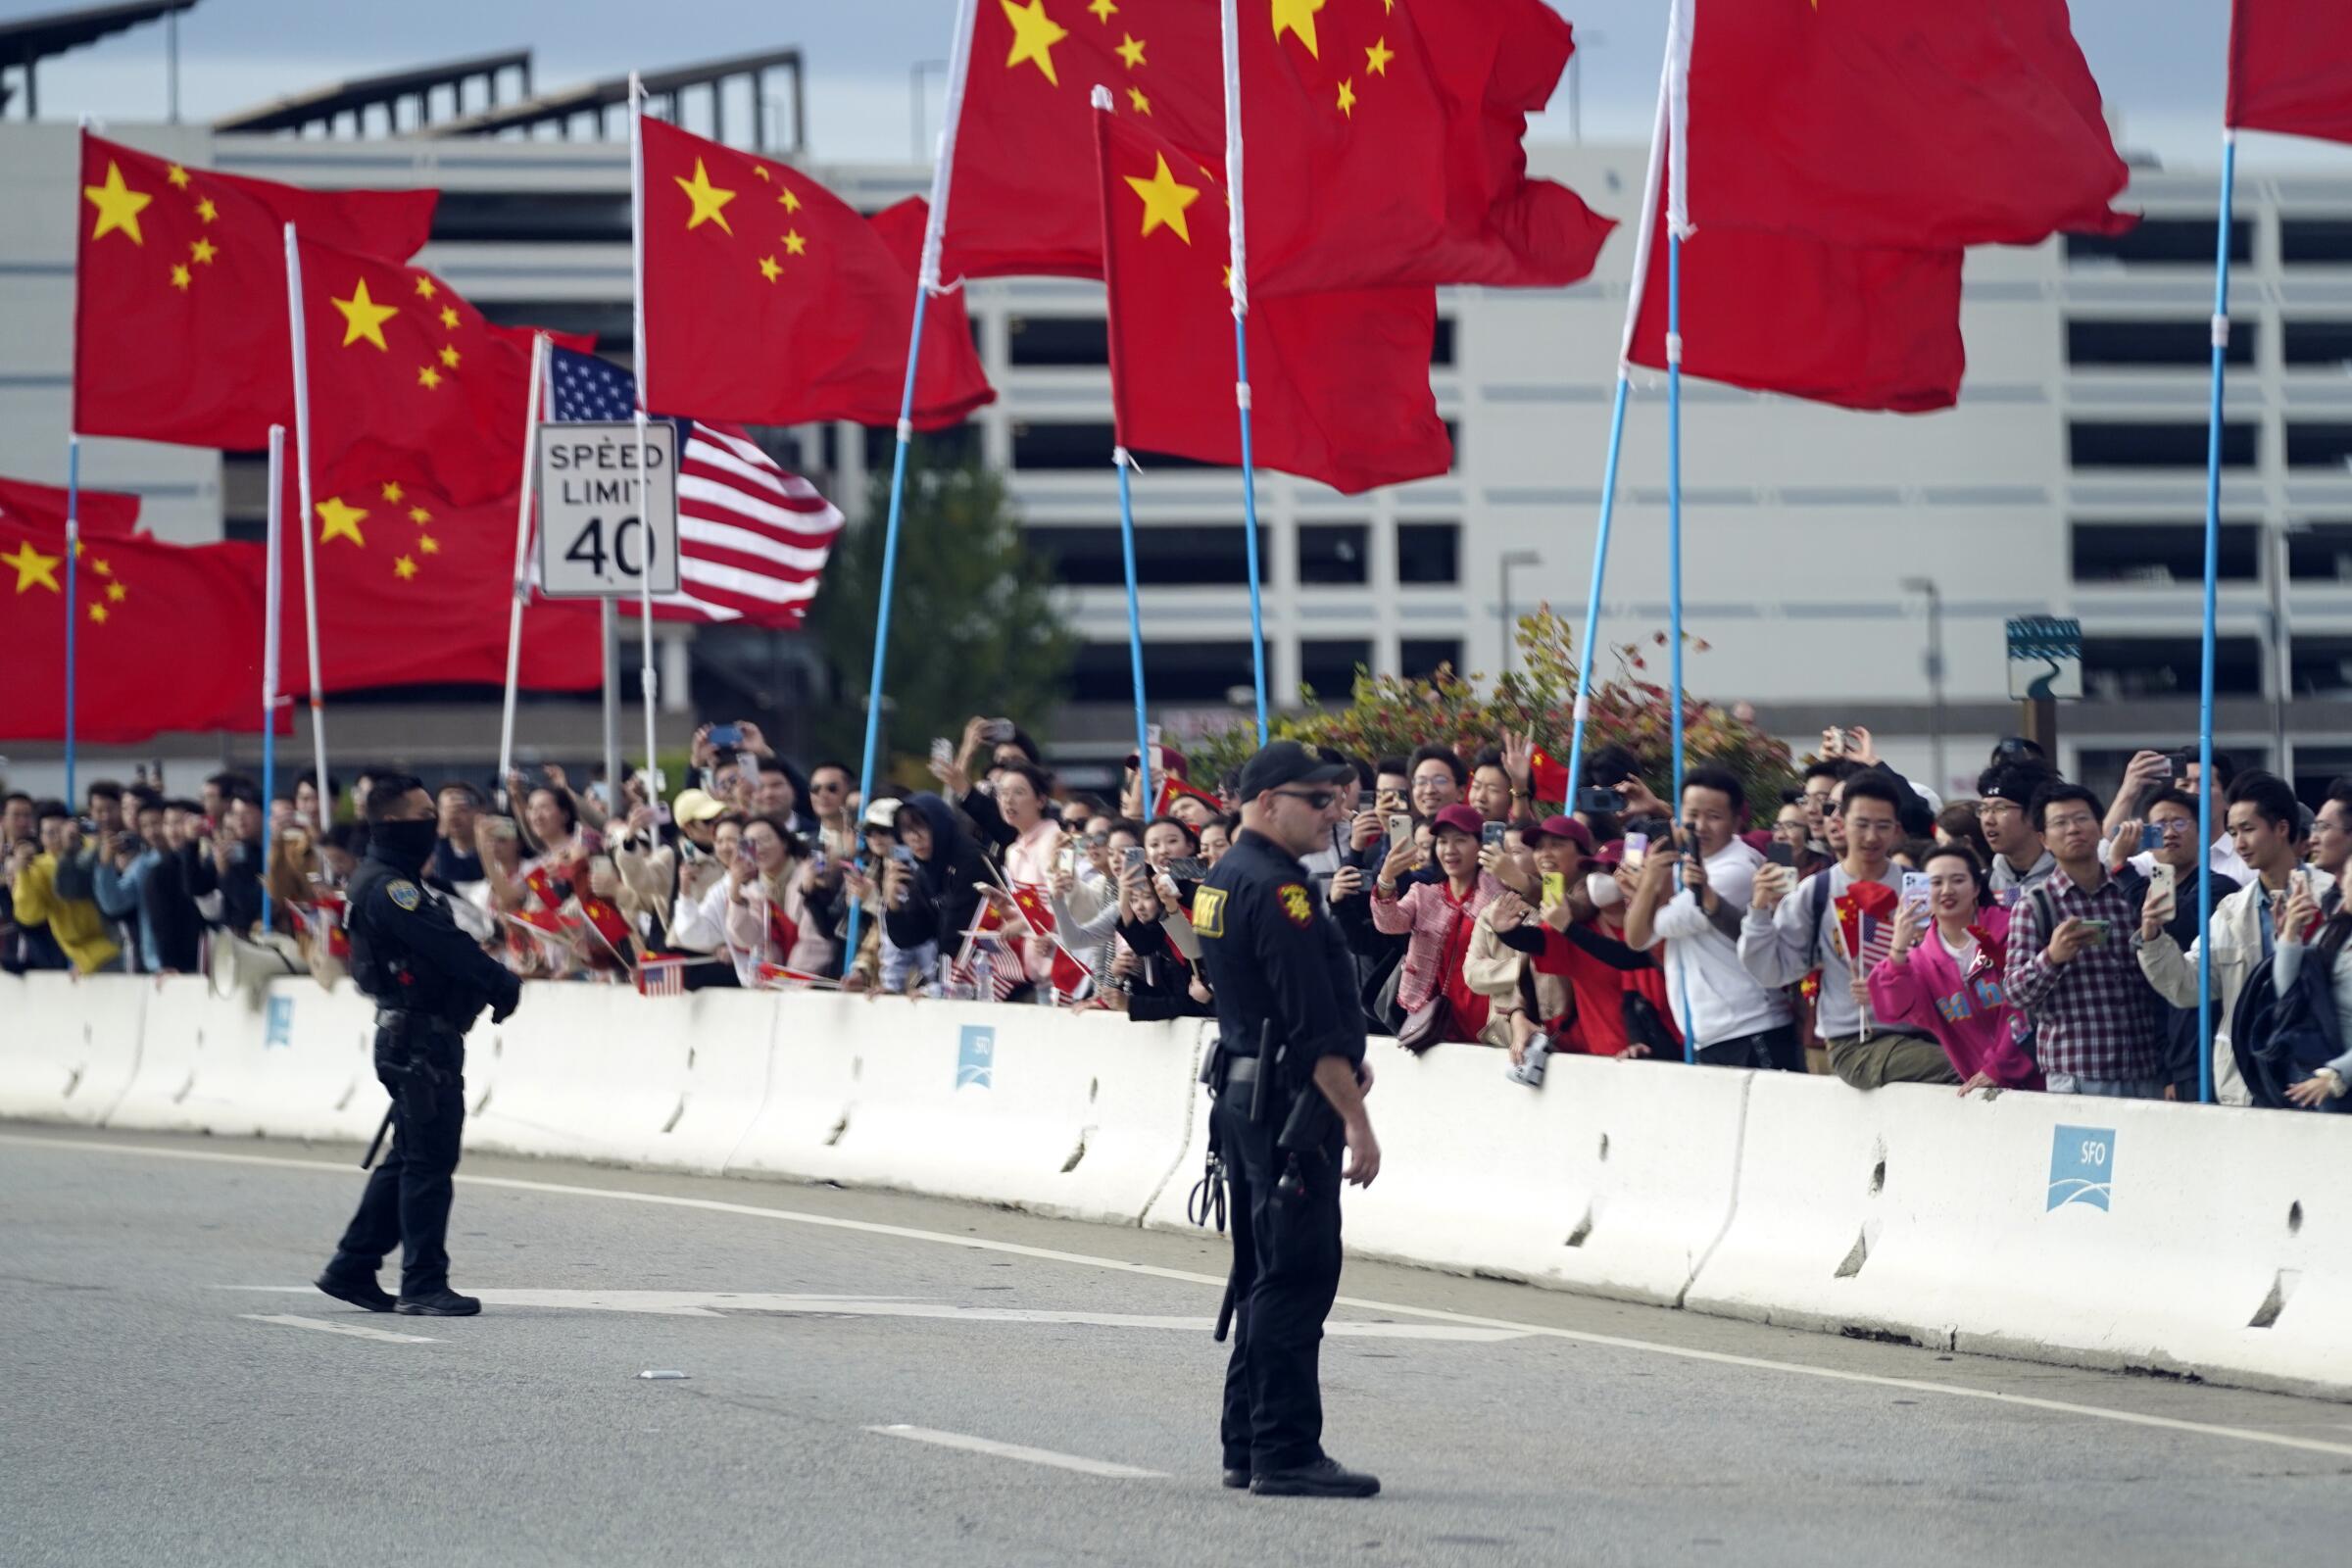 With American and Chinese flags flying, people watch on the side of a road.